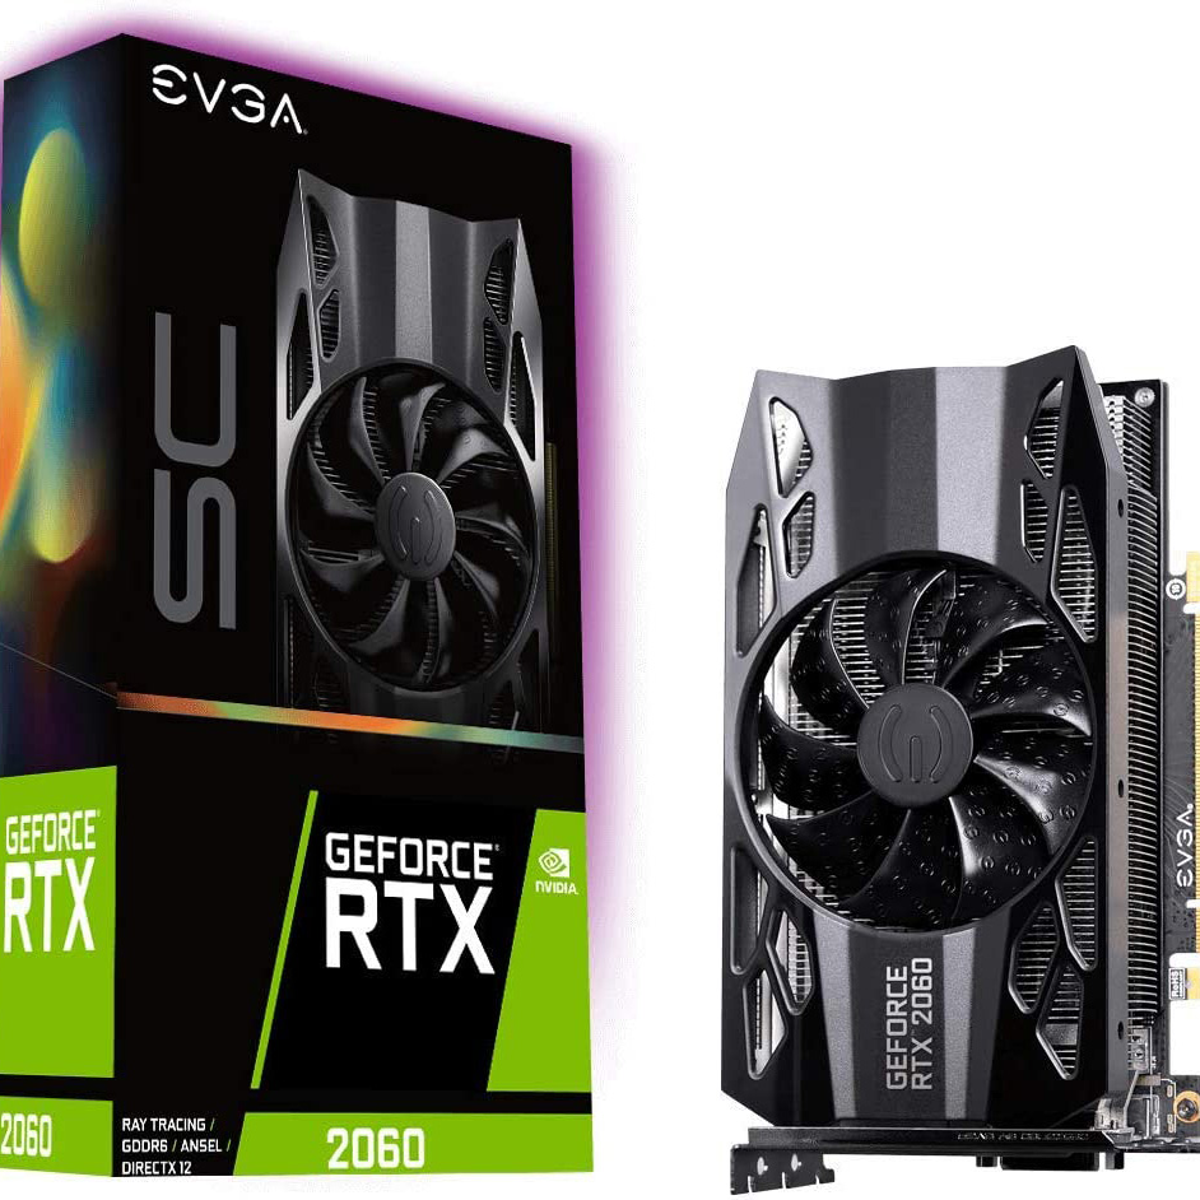 New graphics cards are expensive - so consider steadfast RTX 2060 at £212 | Rock Paper Shotgun